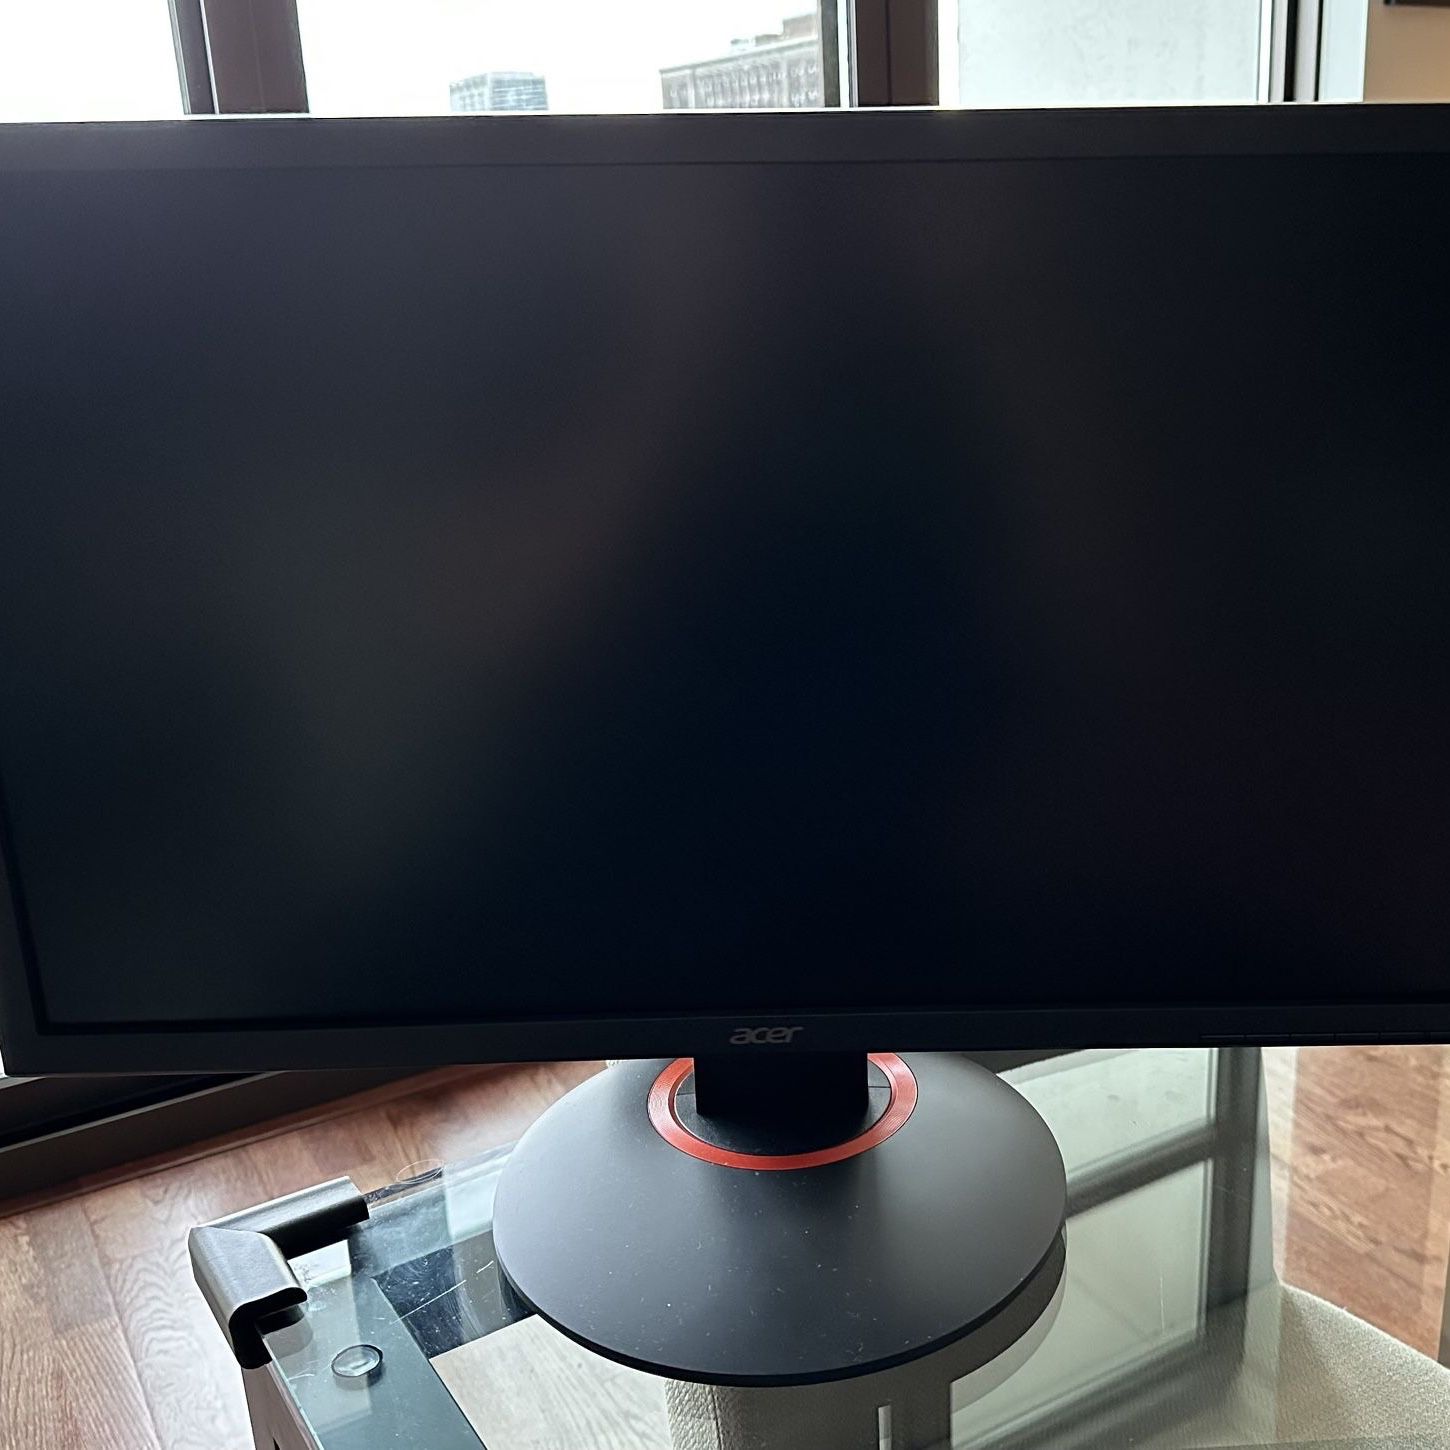 Acer XFA240 24in Monitor